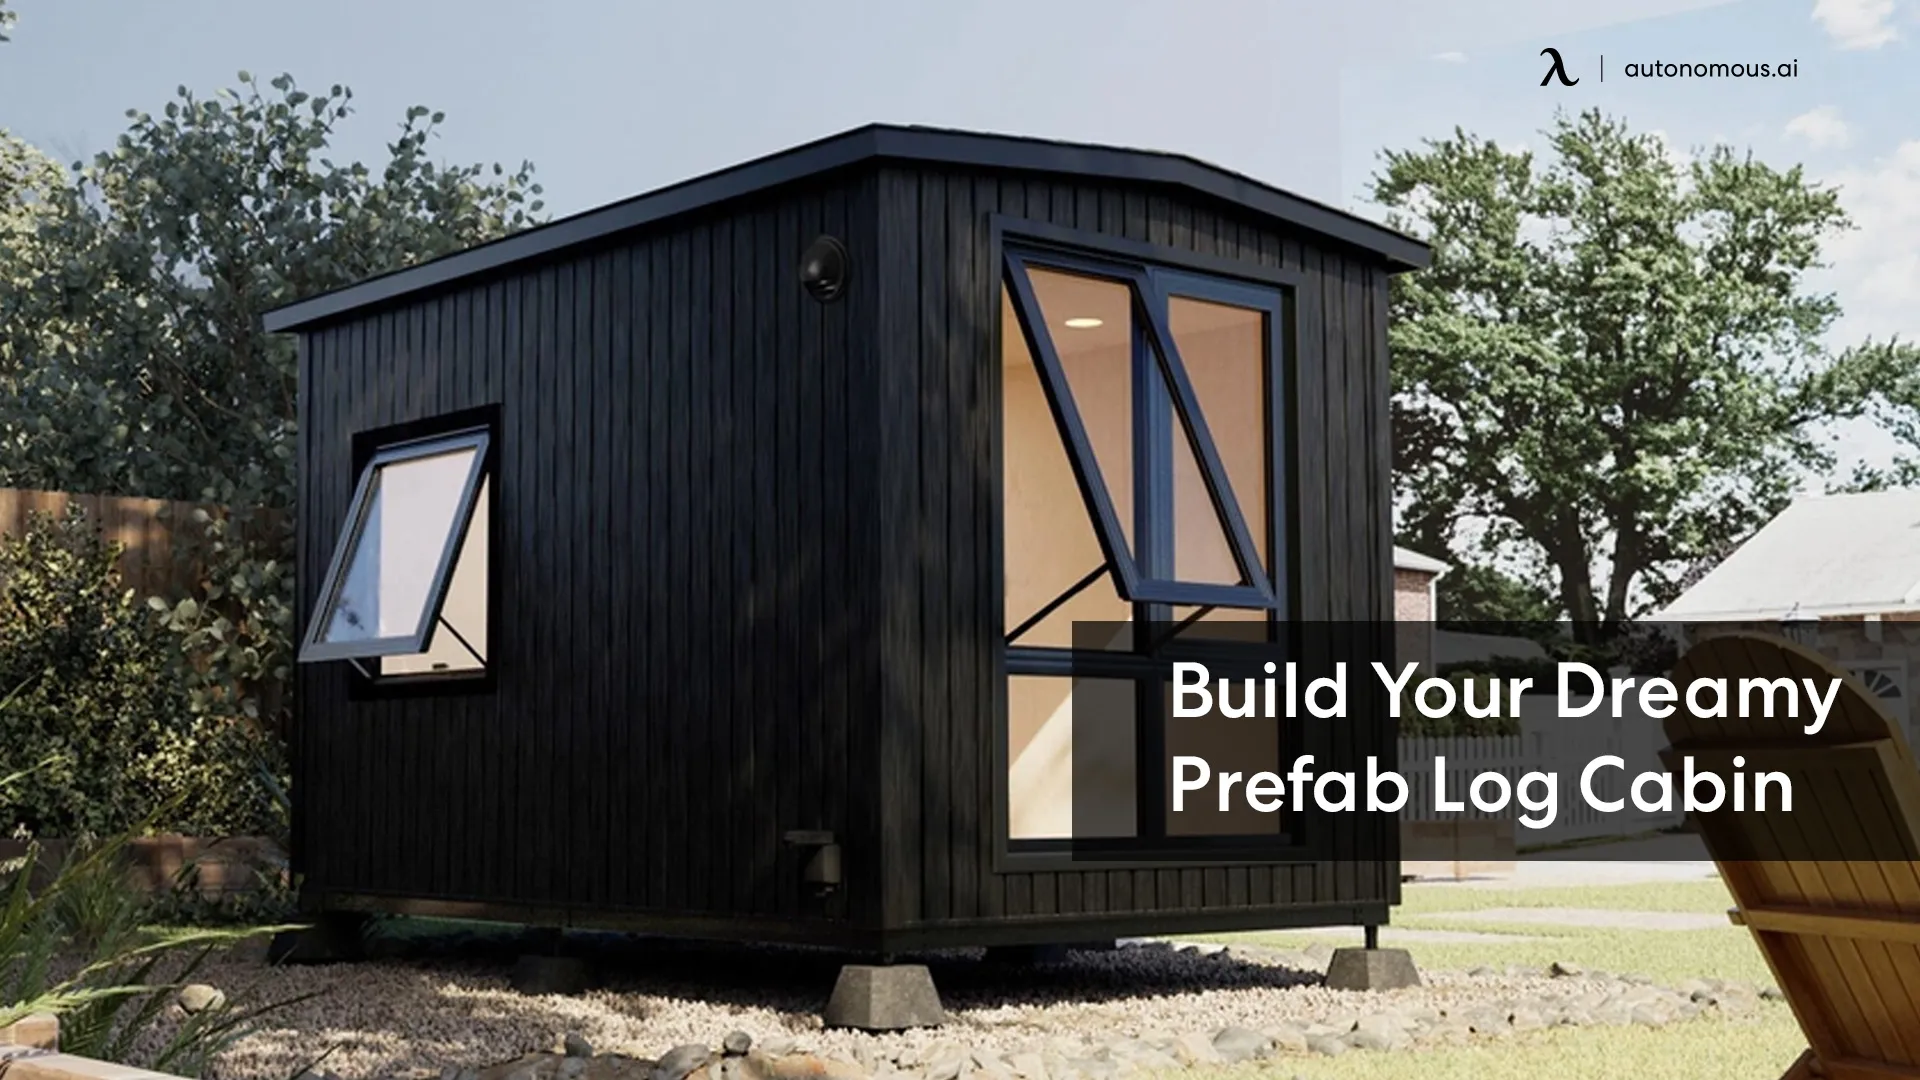 Prefab Log Cabin Prices & Sizes to Consider